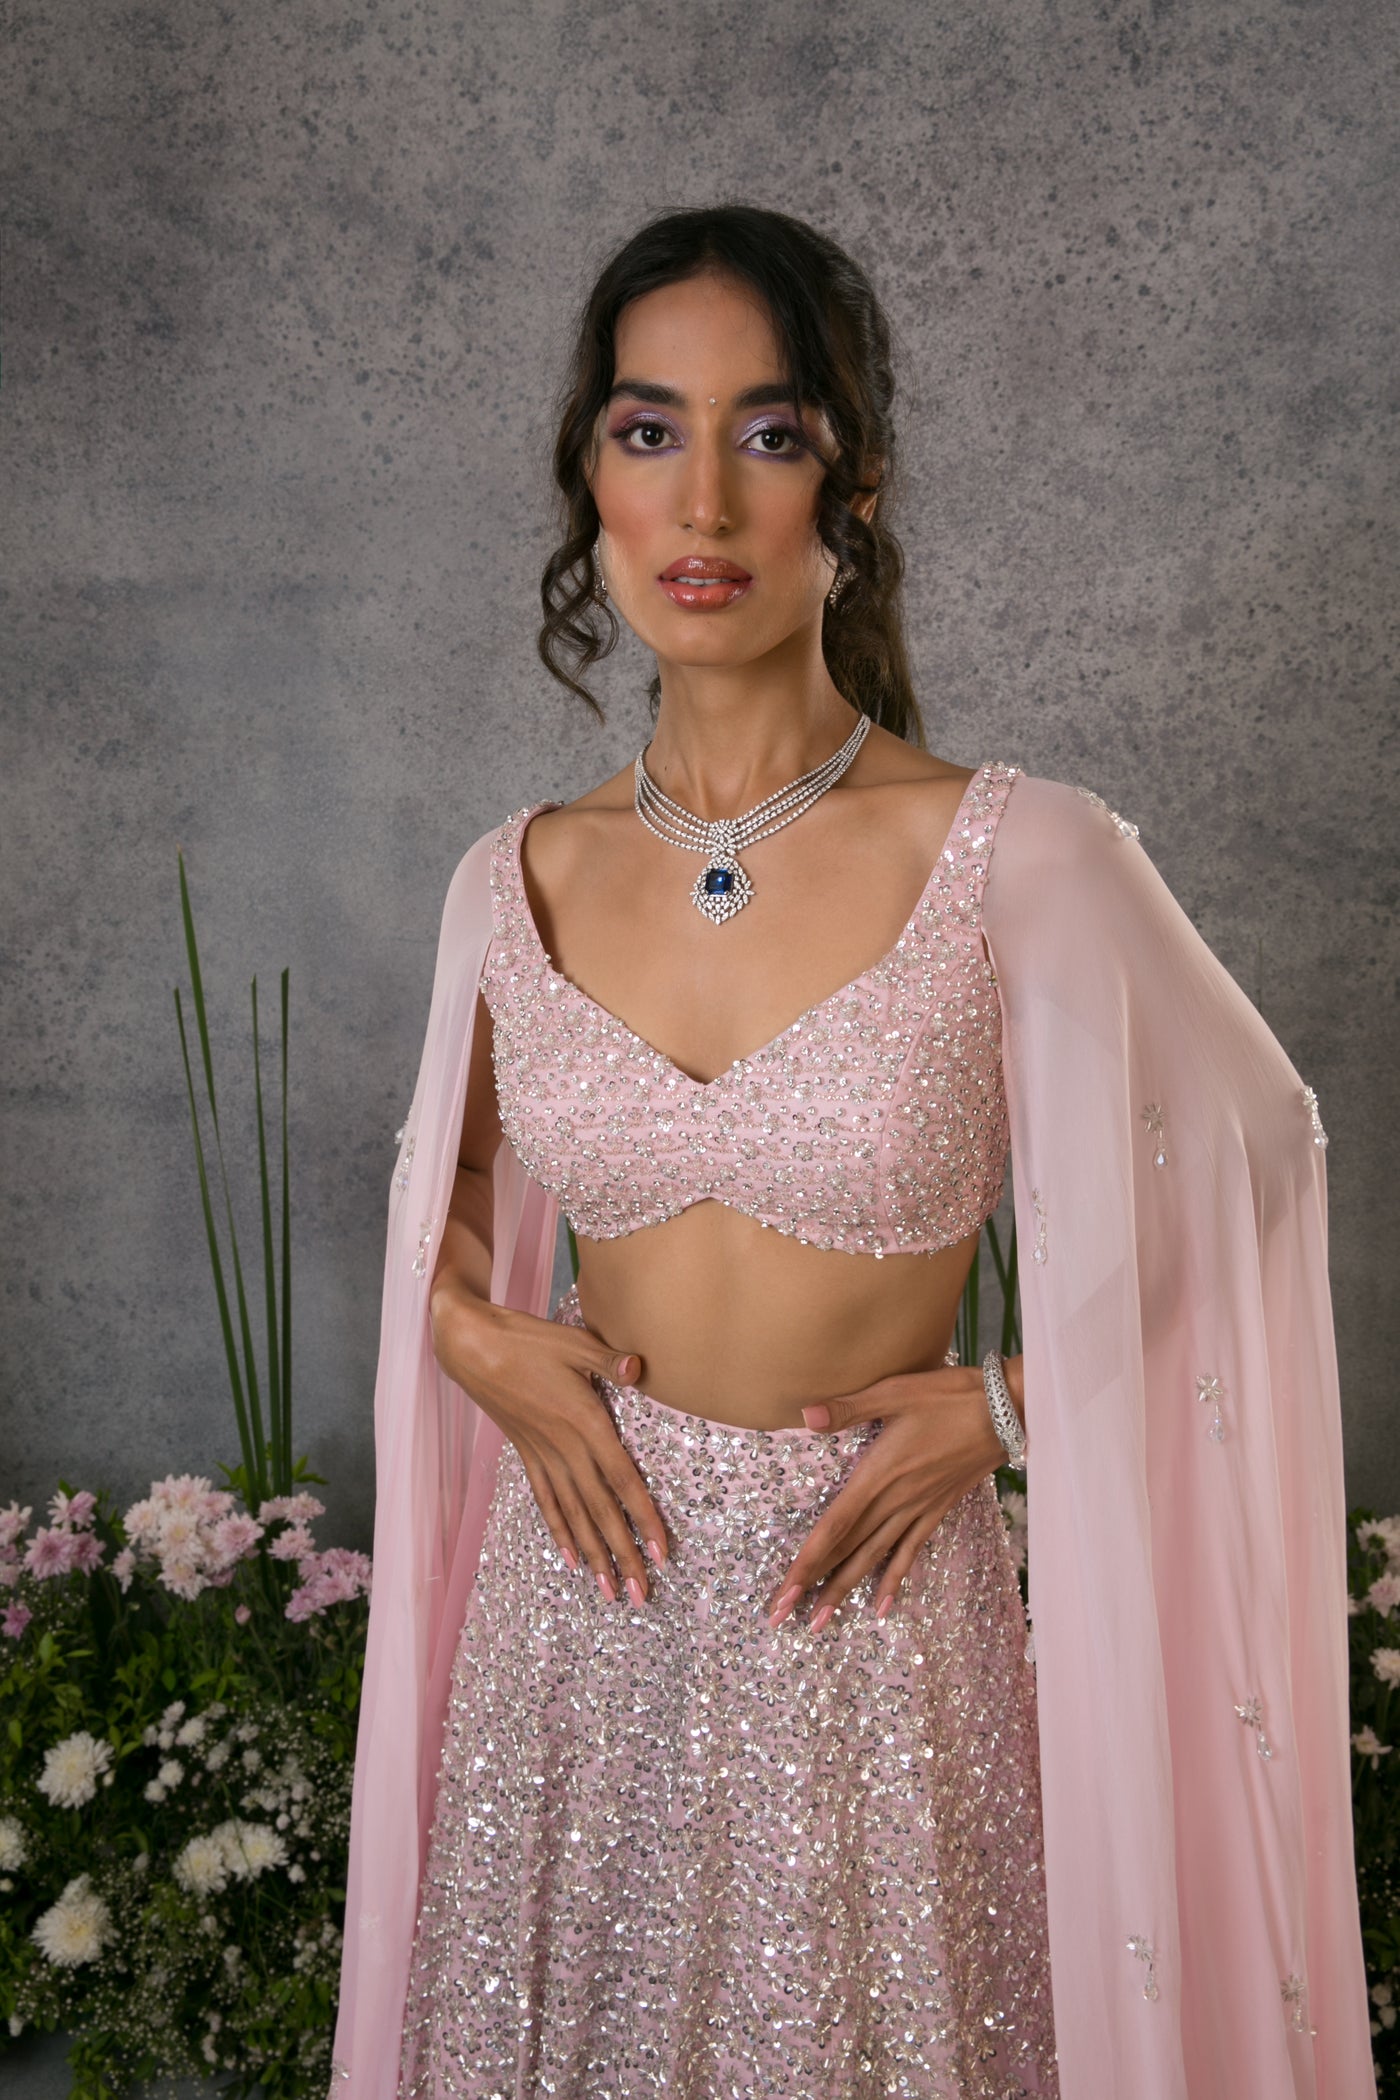 9 Cape Lehenga Designs You Need To See To Shop For A Wedding